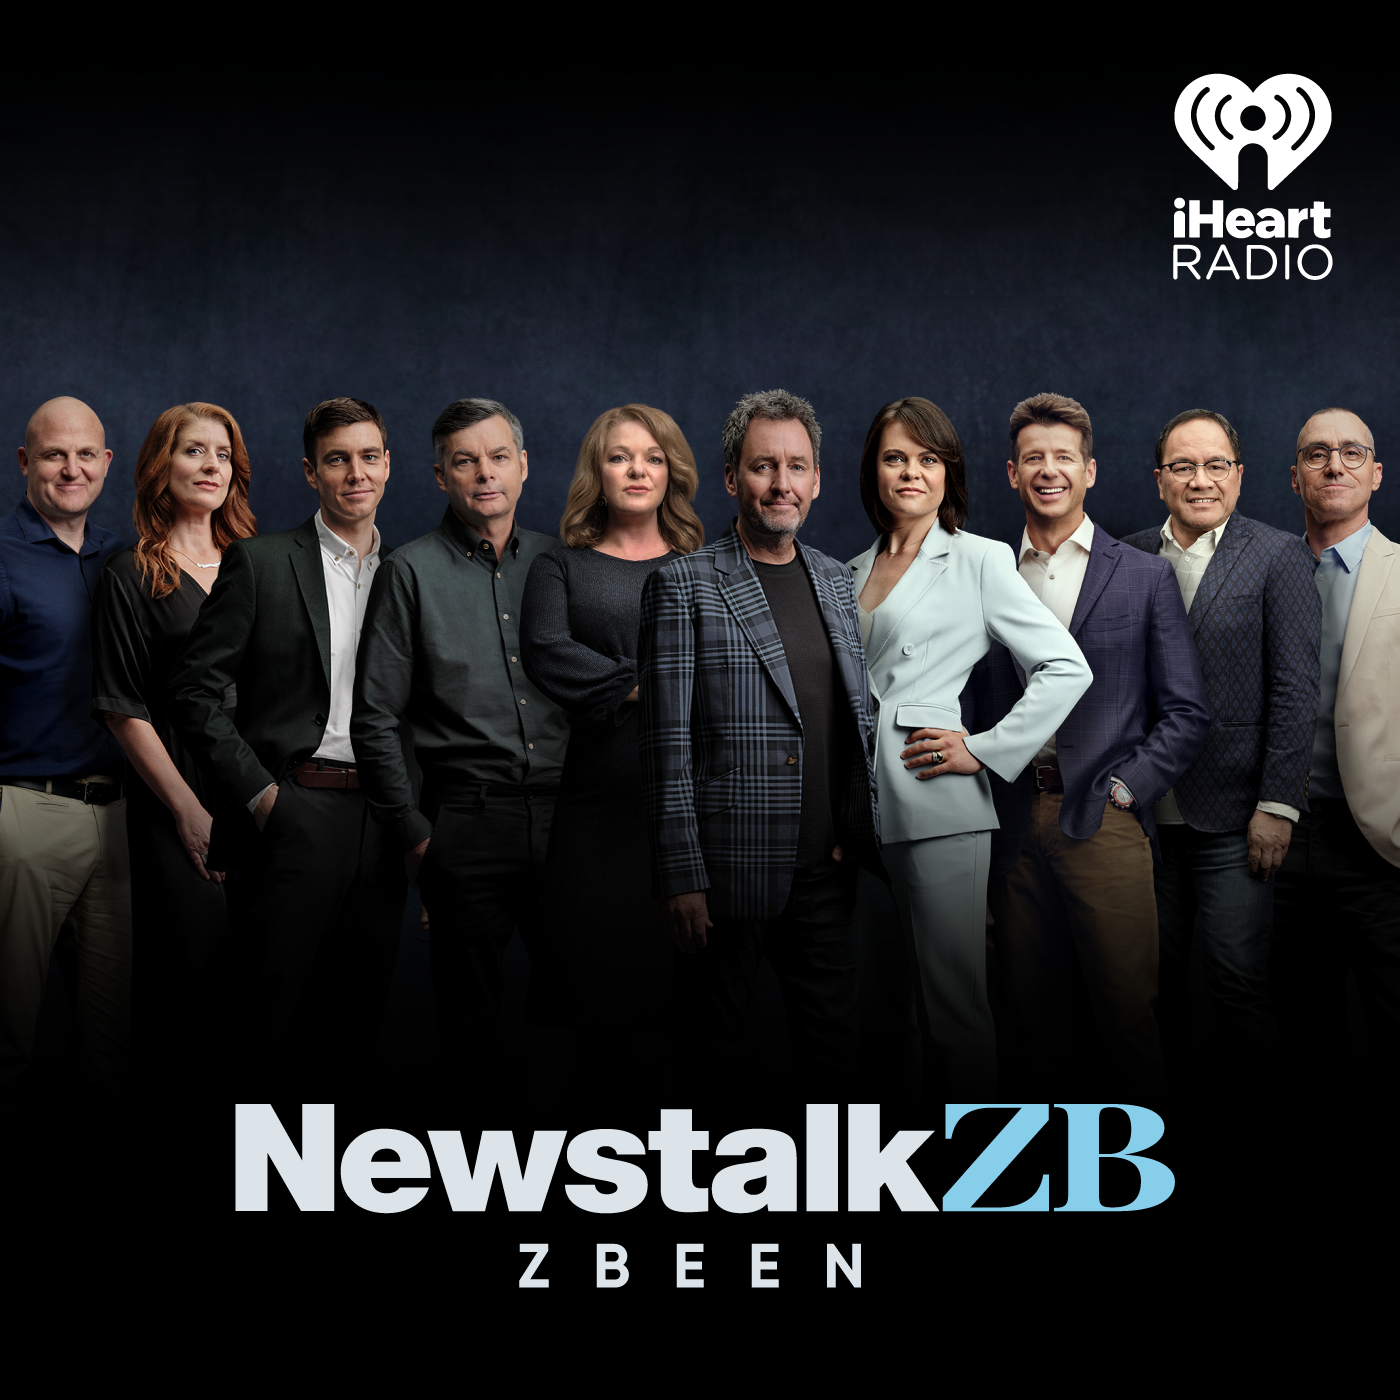 NEWSTALK ZBEEN: Cracking On with It